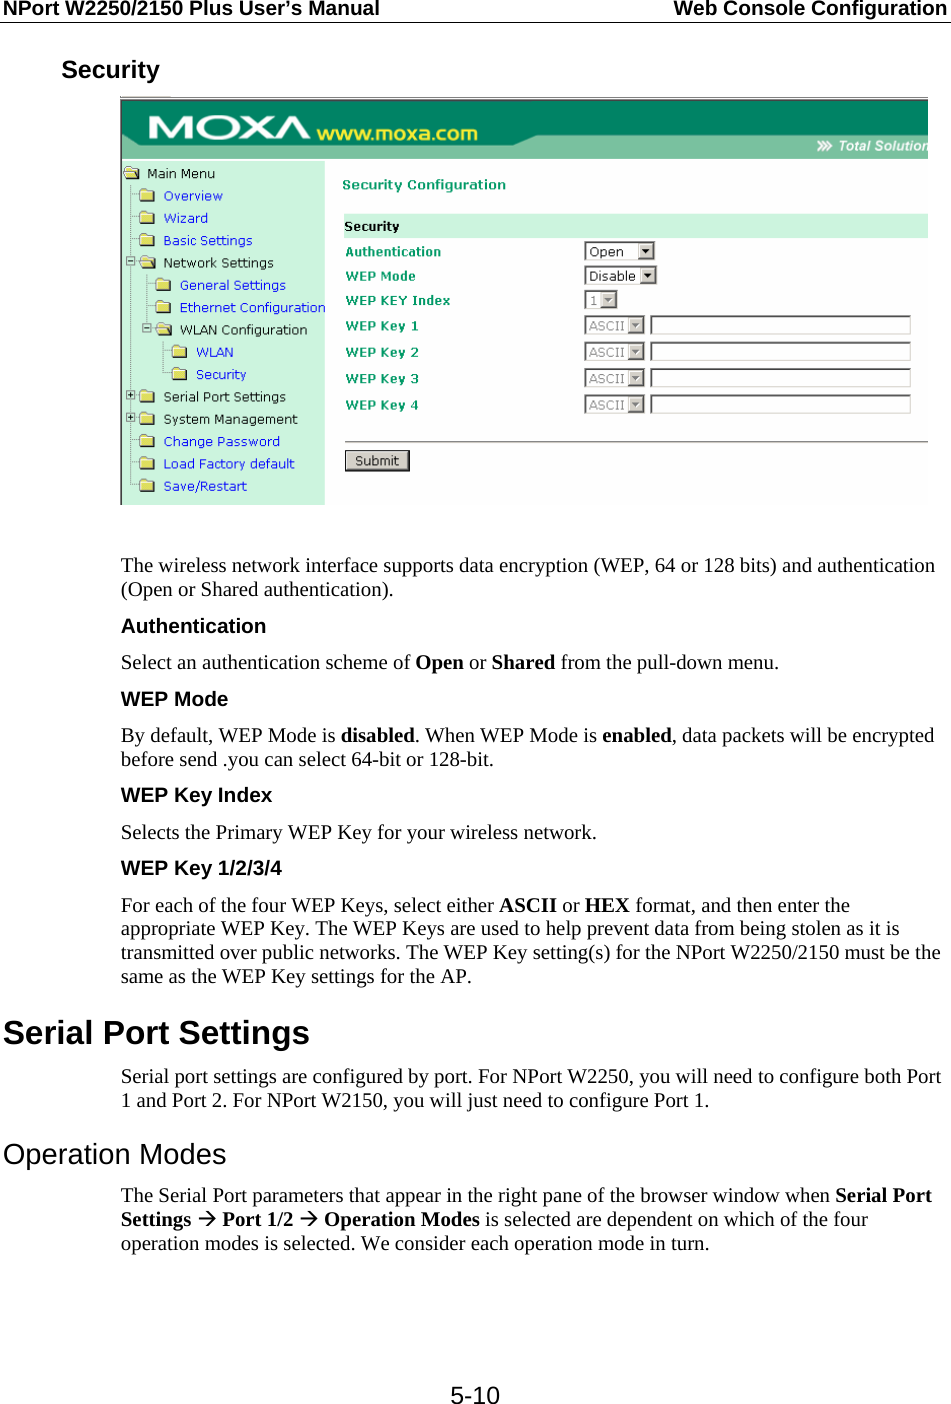 NPort W2250/2150 Plus User’s Manual  Web Console Configuration  5-10Security   The wireless network interface supports data encryption (WEP, 64 or 128 bits) and authentication (Open or Shared authentication). Authentication Select an authentication scheme of Open or Shared from the pull-down menu. WEP Mode By default, WEP Mode is disabled. When WEP Mode is enabled, data packets will be encrypted before send .you can select 64-bit or 128-bit.   WEP Key Index Selects the Primary WEP Key for your wireless network. WEP Key 1/2/3/4 For each of the four WEP Keys, select either ASCII or HEX format, and then enter the appropriate WEP Key. The WEP Keys are used to help prevent data from being stolen as it is transmitted over public networks. The WEP Key setting(s) for the NPort W2250/2150 must be the same as the WEP Key settings for the AP. Serial Port Settings Serial port settings are configured by port. For NPort W2250, you will need to configure both Port 1 and Port 2. For NPort W2150, you will just need to configure Port 1. Operation Modes The Serial Port parameters that appear in the right pane of the browser window when Serial Port Settings Æ Port 1/2 Æ Operation Modes is selected are dependent on which of the four operation modes is selected. We consider each operation mode in turn.   